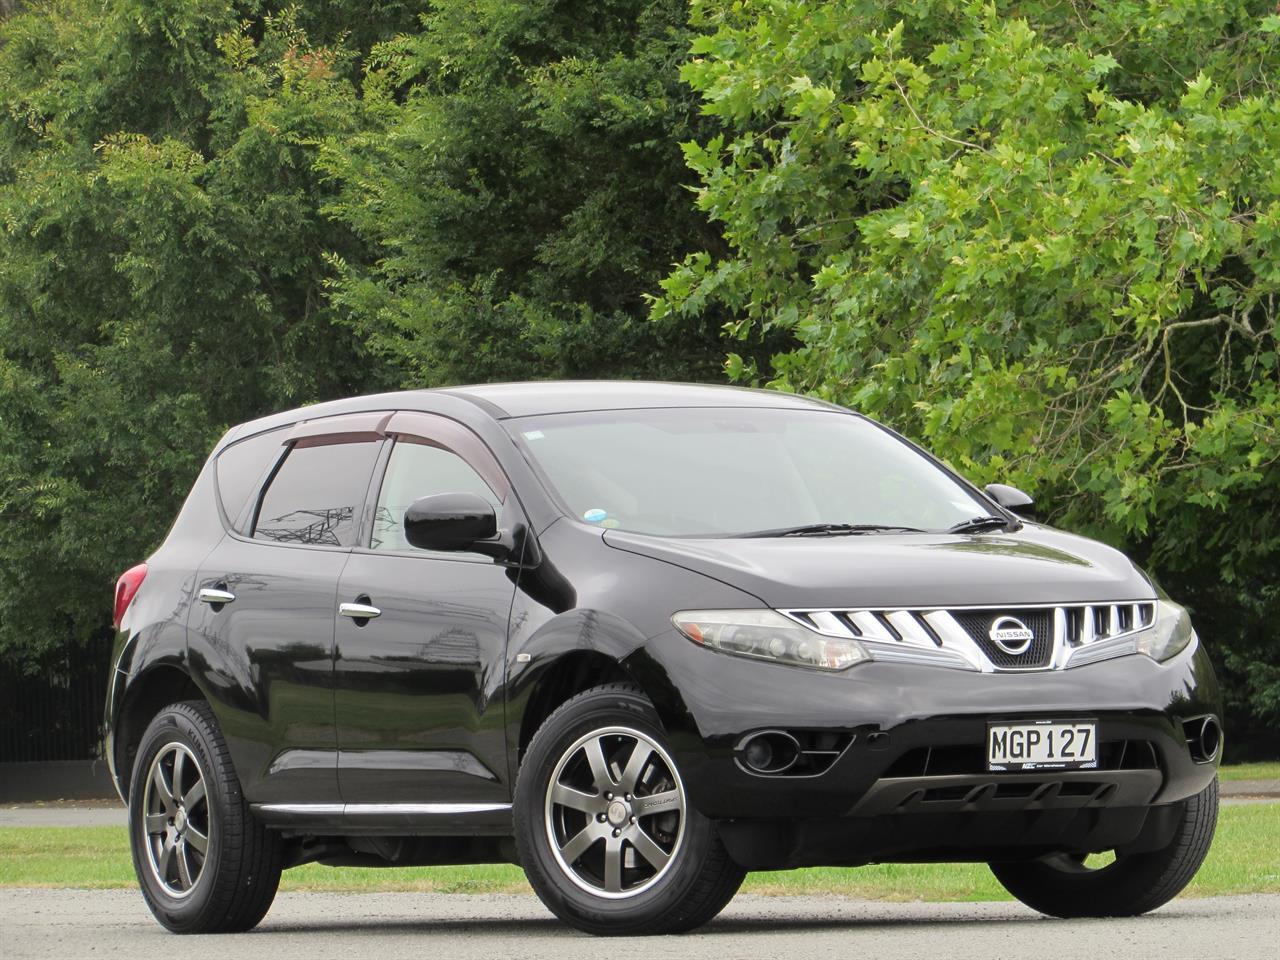 NZC 2009 Nissan MURANO just arrived to Christchurch